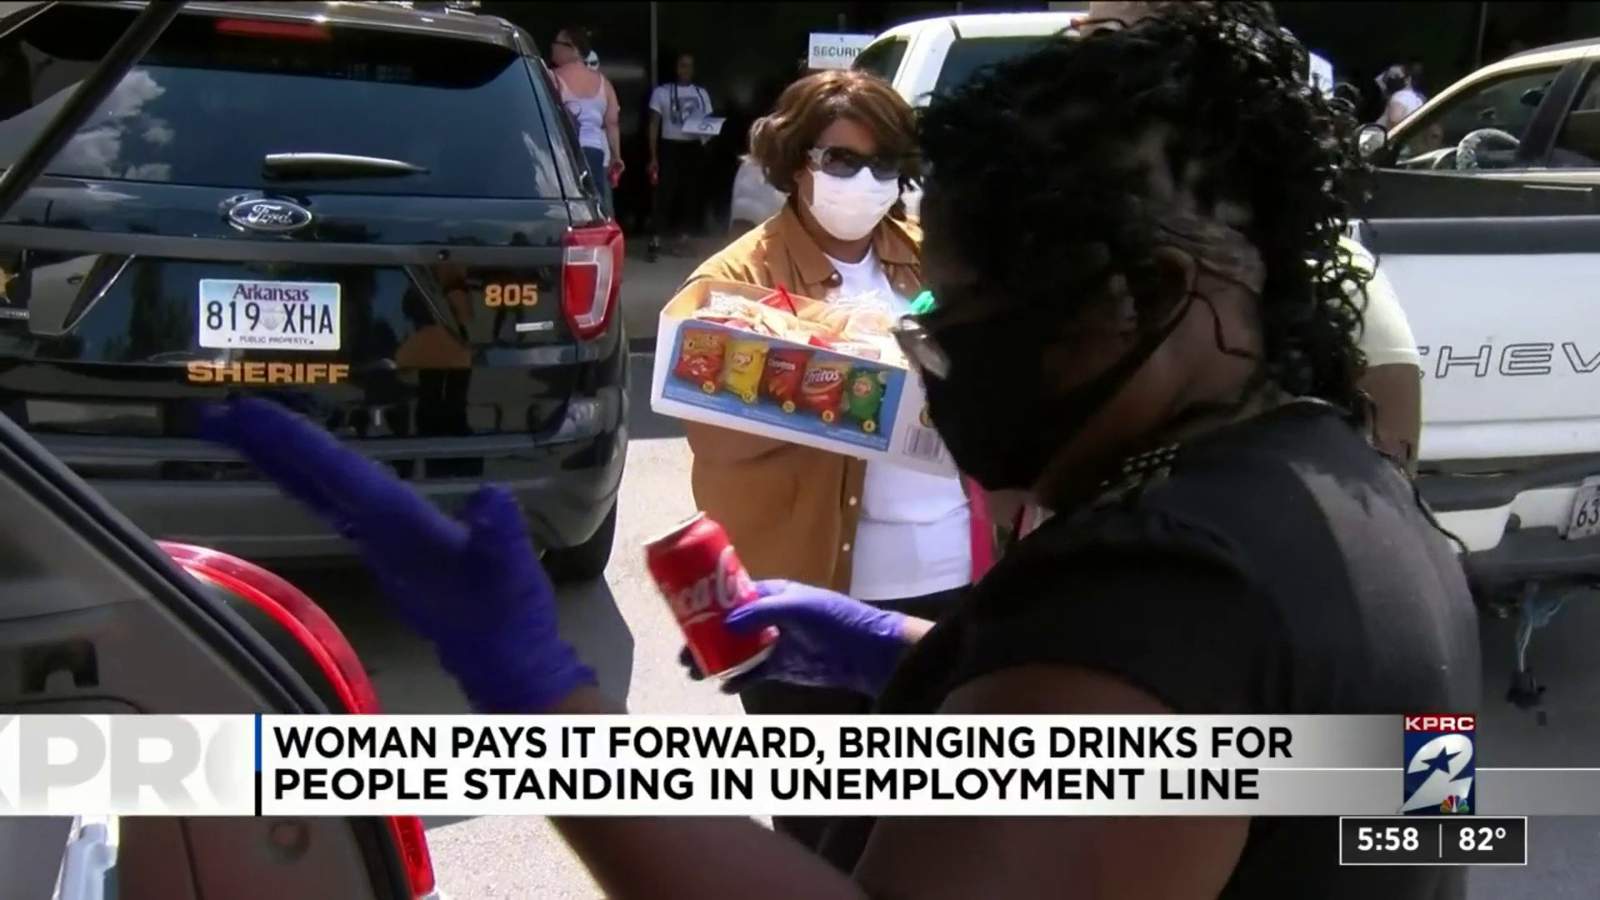 One Good Thing: Woman pays it forward by bringing drinks for people standing in unemployment line